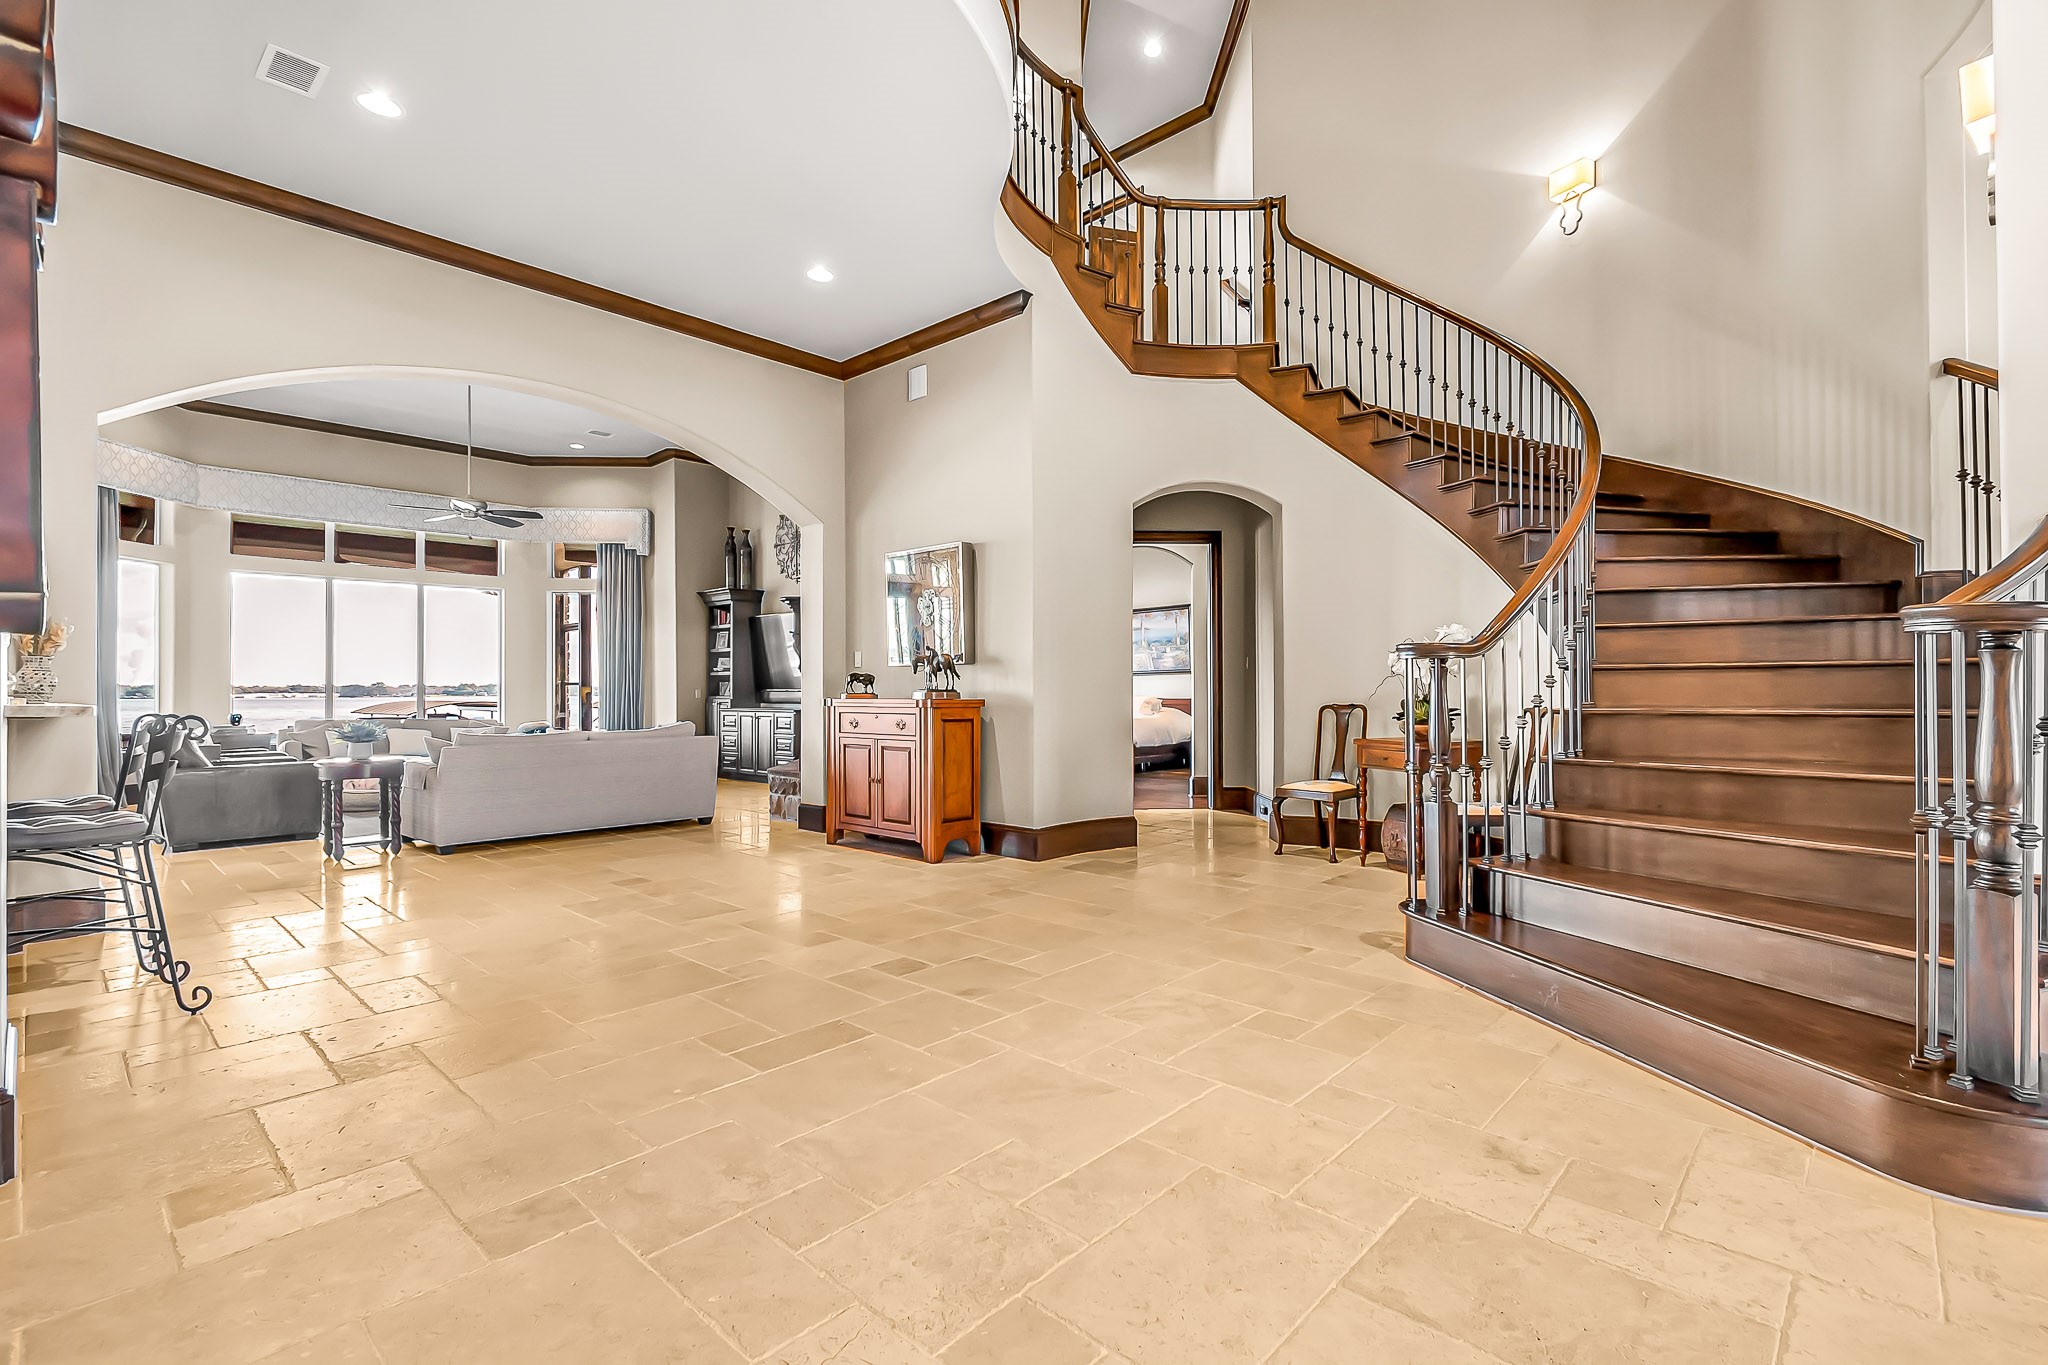 You are greeted by extensive water views upon entering the home. It was designed with a grand entry way to welcome your guests. There is a captivating hallway to the left with sconces and a custom pearl finish ceiling.